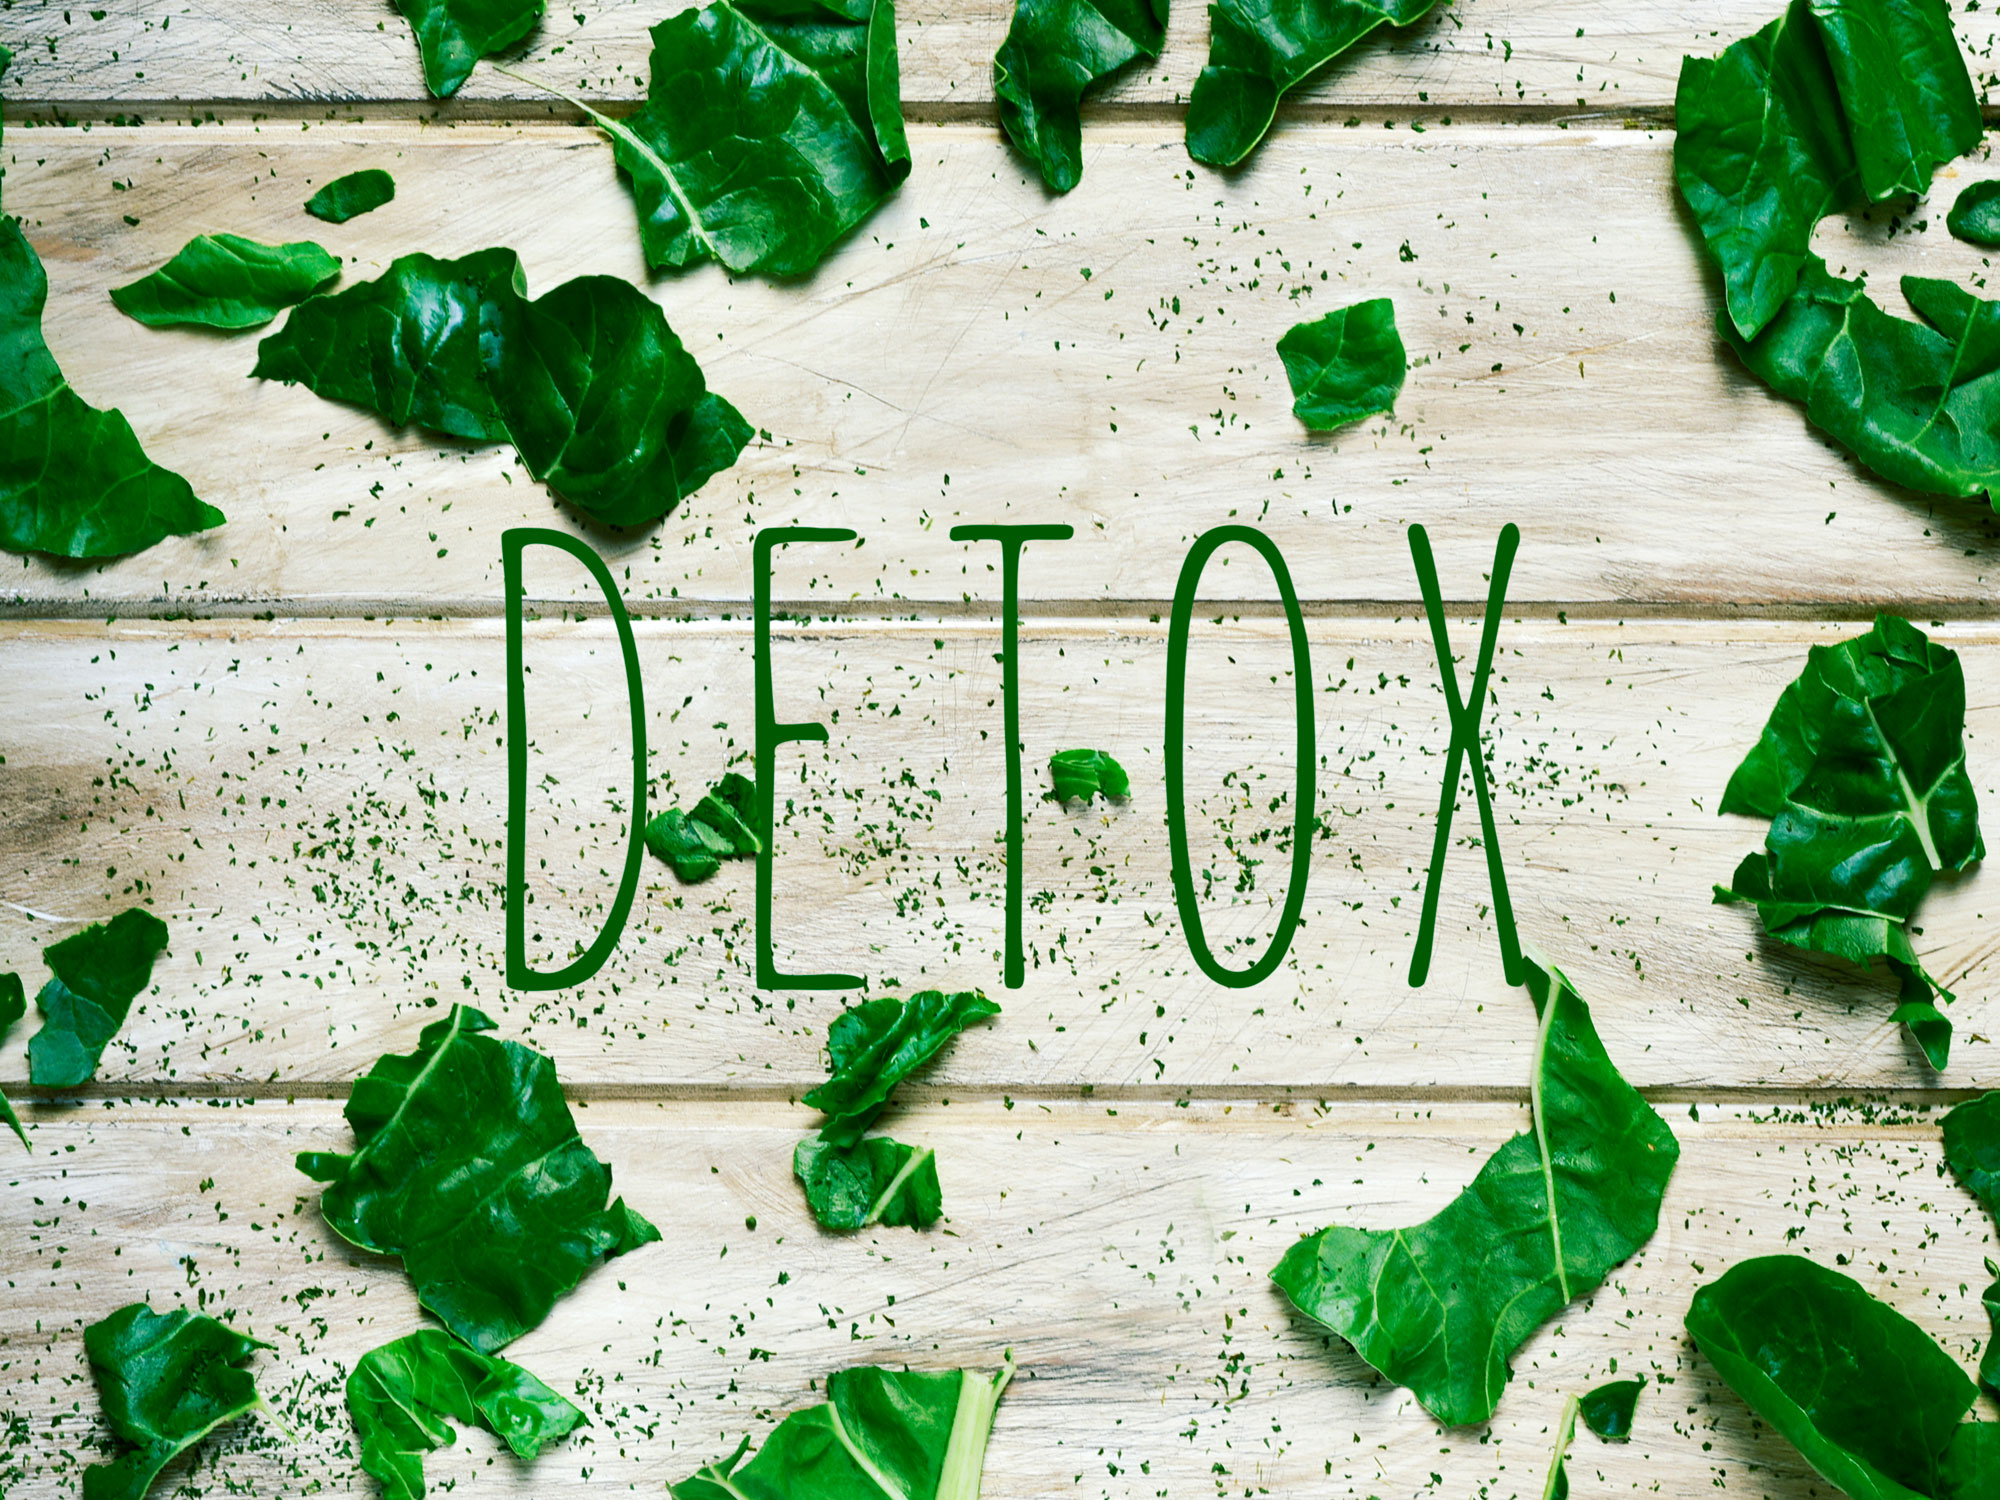 5 ways to detox daily without a diet